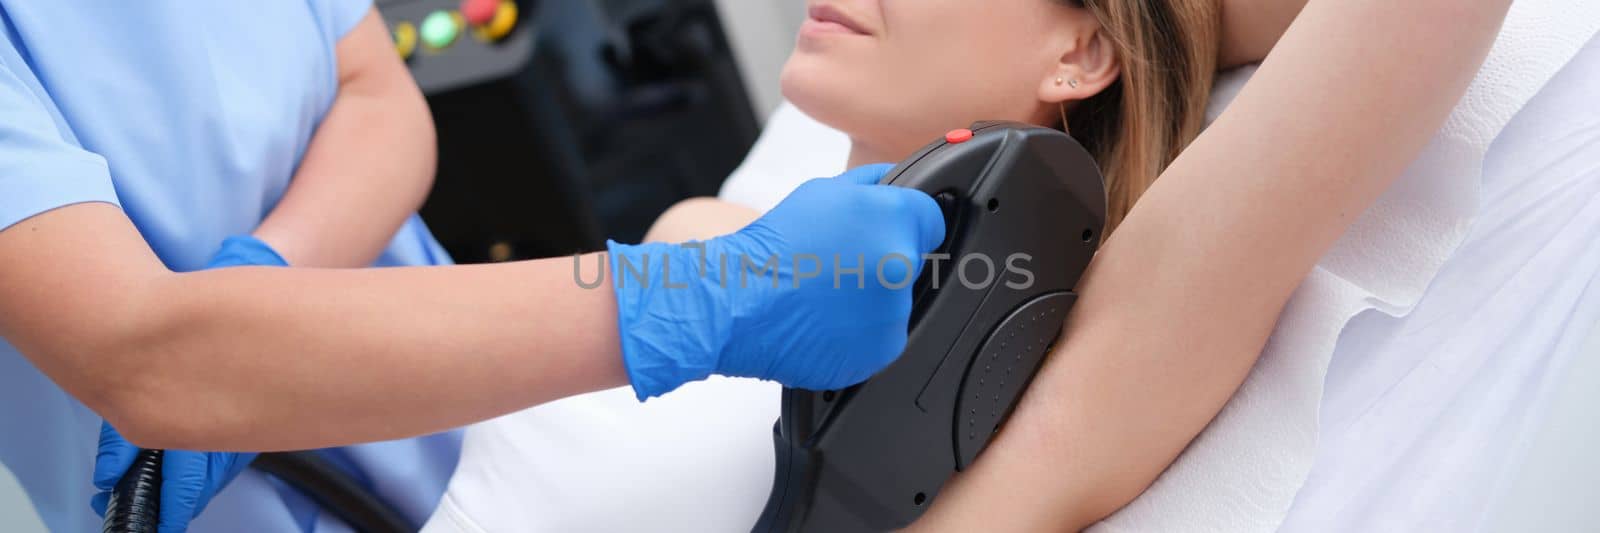 Woman undergoes hair removal procedure with photoepilator or laser hair removal of armpits in salon by kuprevich